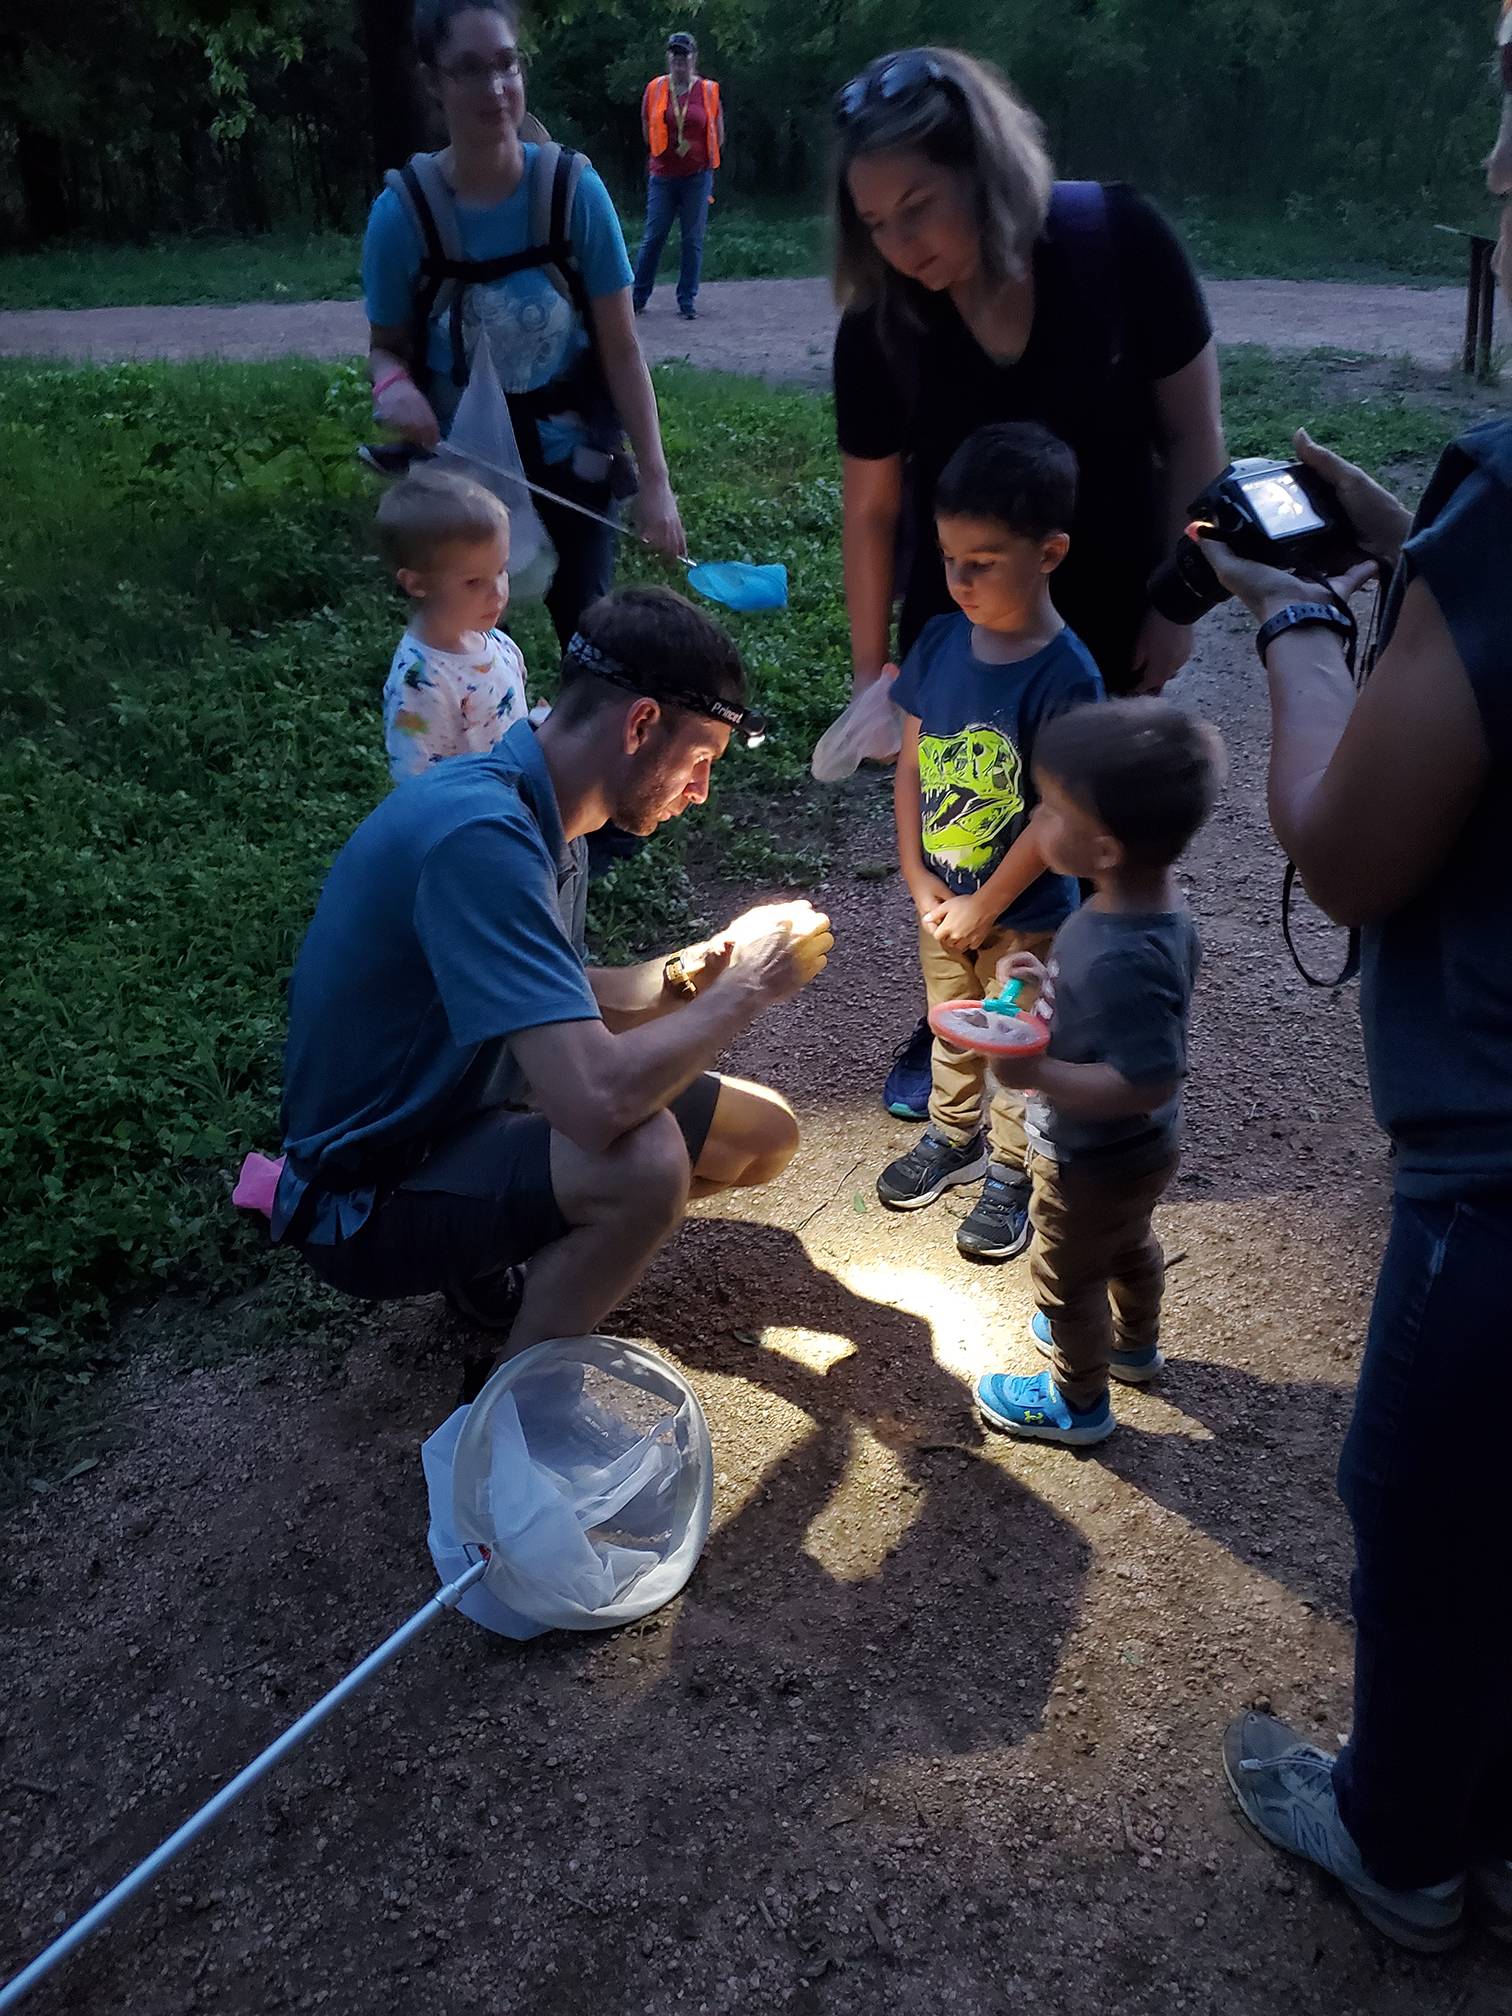 man with headlamp shows something in his hands to small children